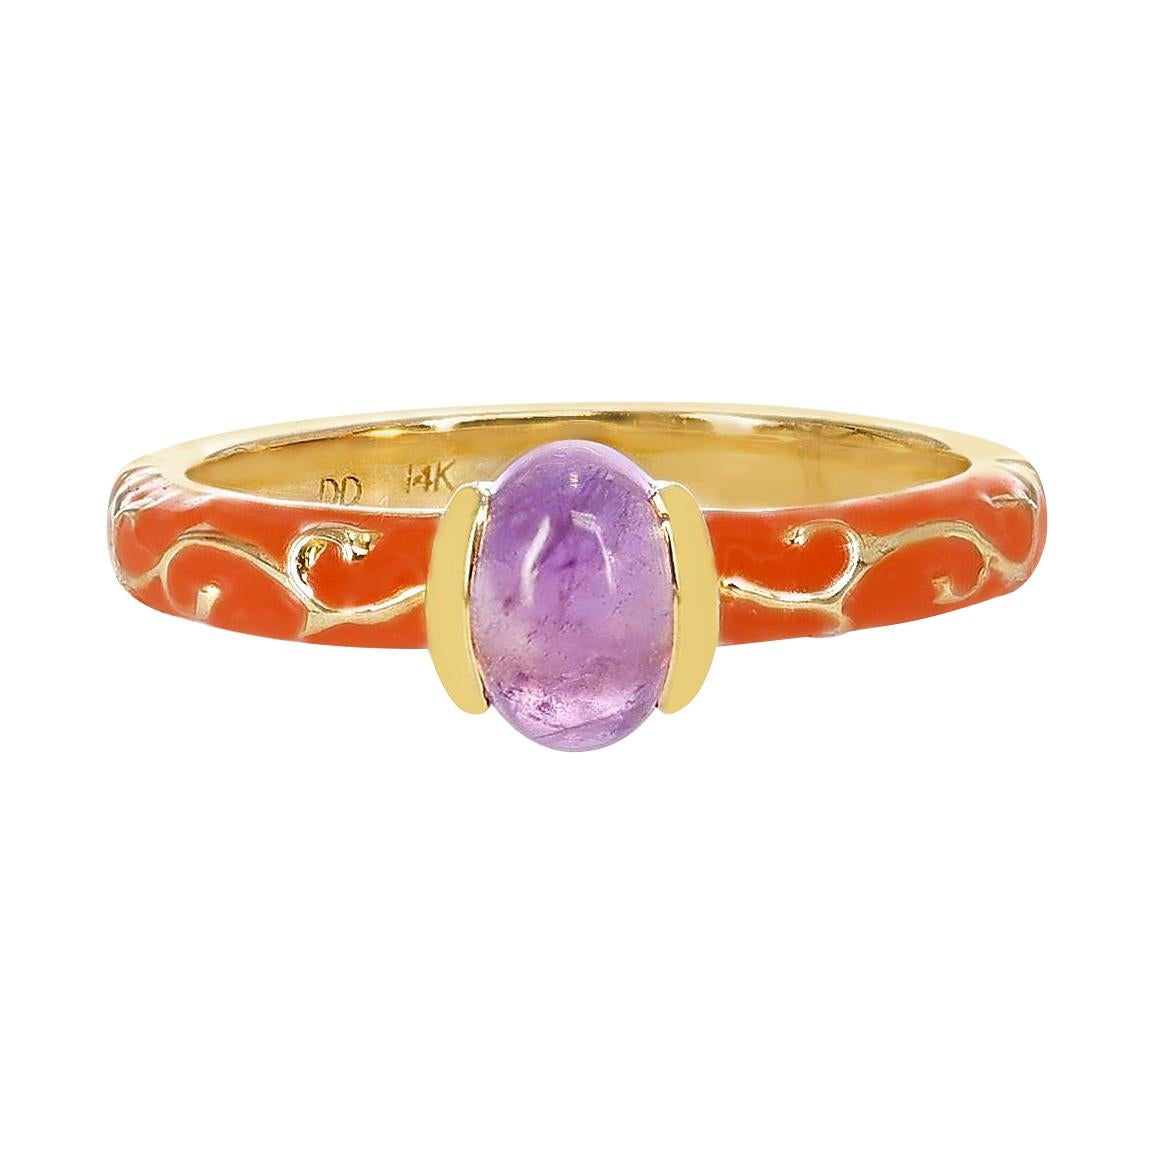 0.64 Ct. Oval Amethyst Cabochon with Orange Enamel with Gold Design, 14k